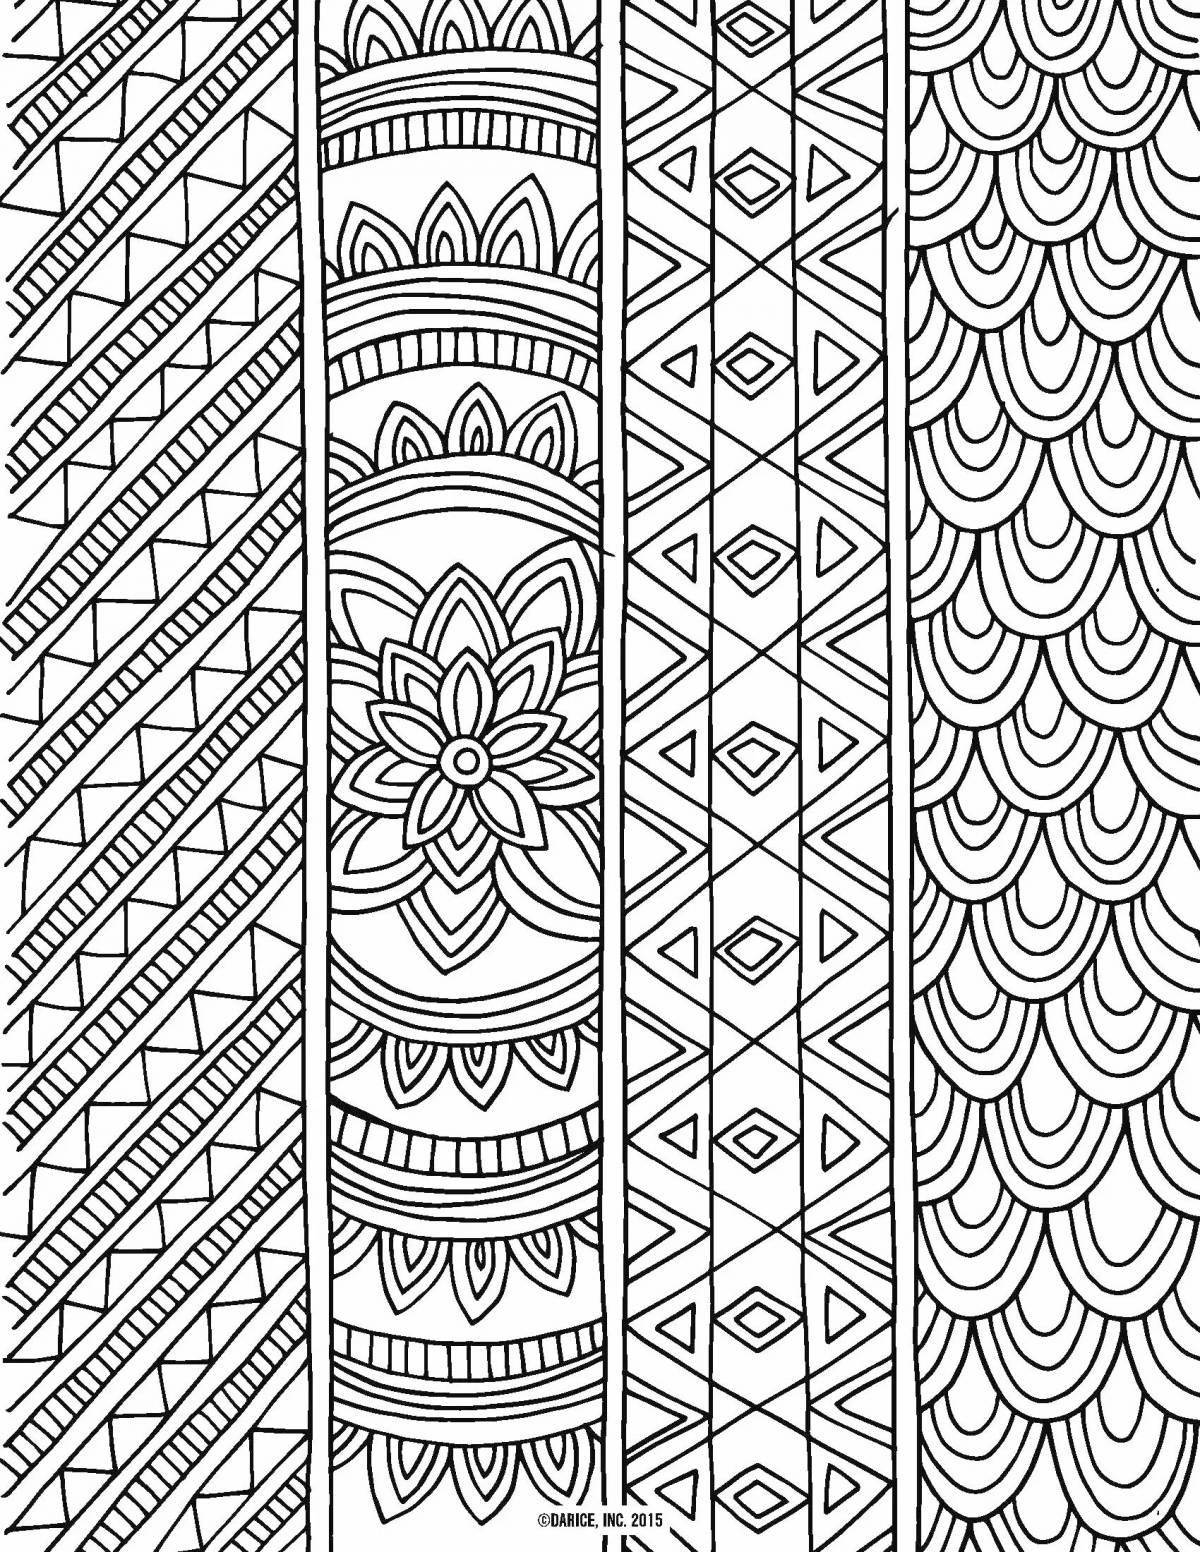 Geometric patterns and ornaments for coloring